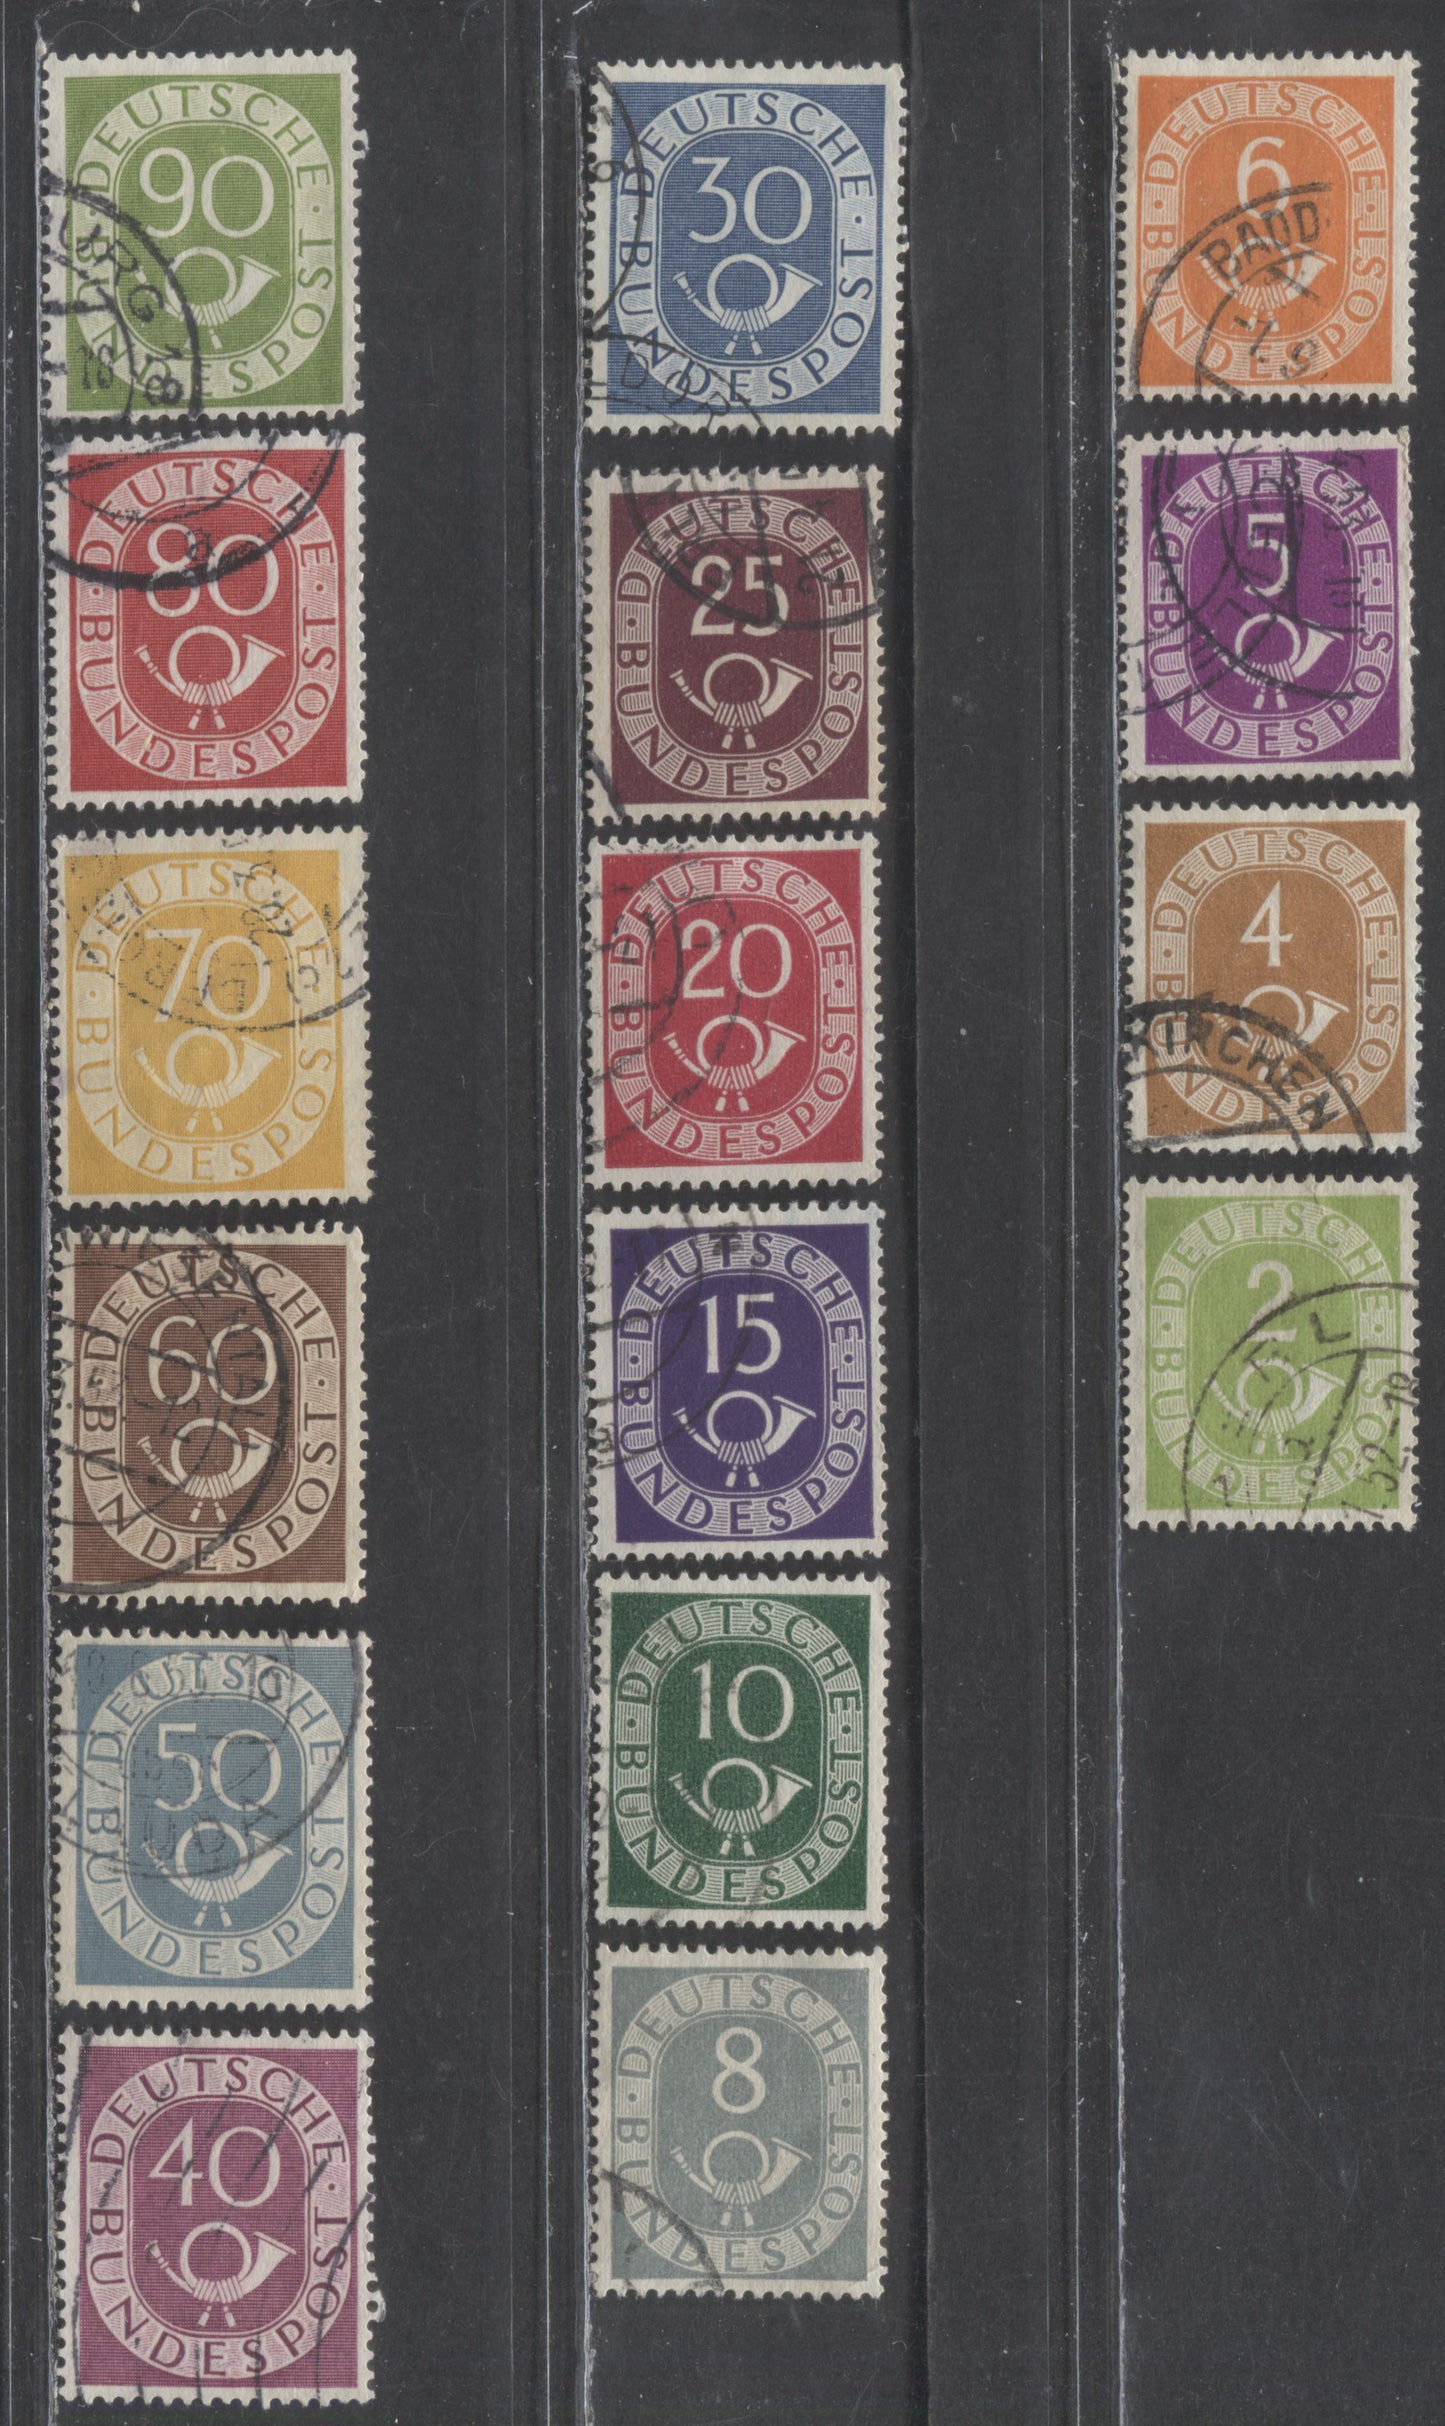 Lot 116 Germany SC#670-685 1951-1952 Posthorn Definitives, 16 Fine/Very Fine Used Singles, Click on Listing to See ALL Pictures, 2017 Scott Cat. $40.9 USD